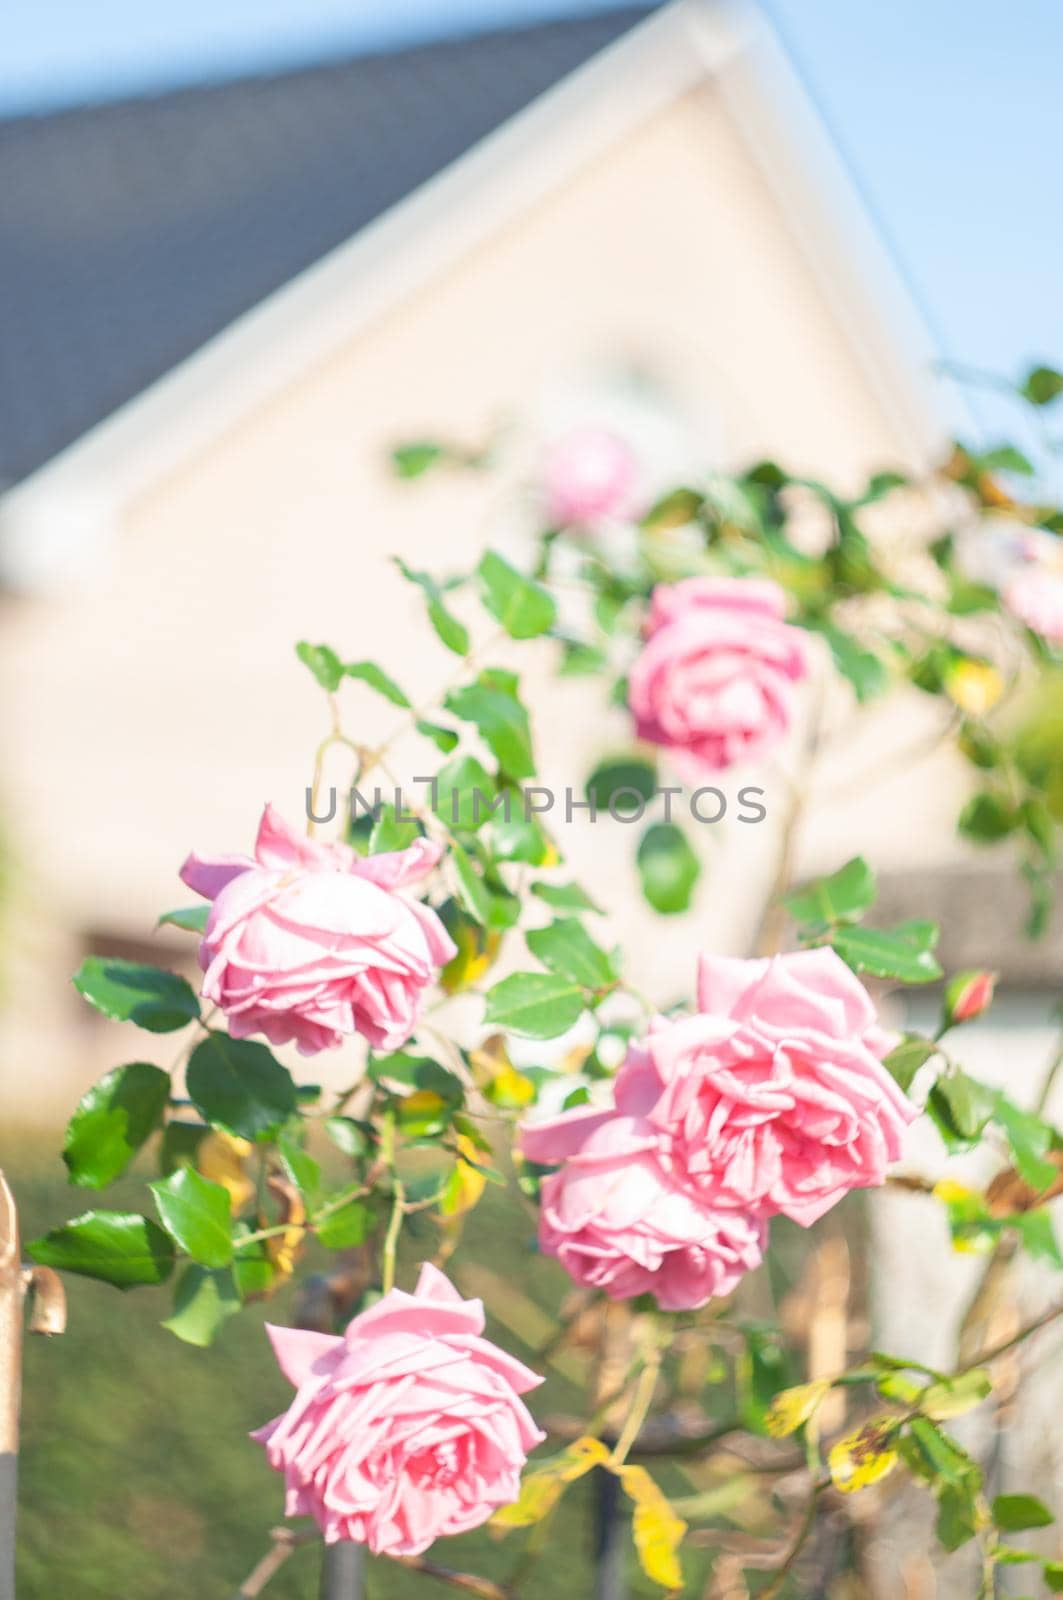 profusely blooming pink rose bush near the fence, against the house, by KaterinaDalemans